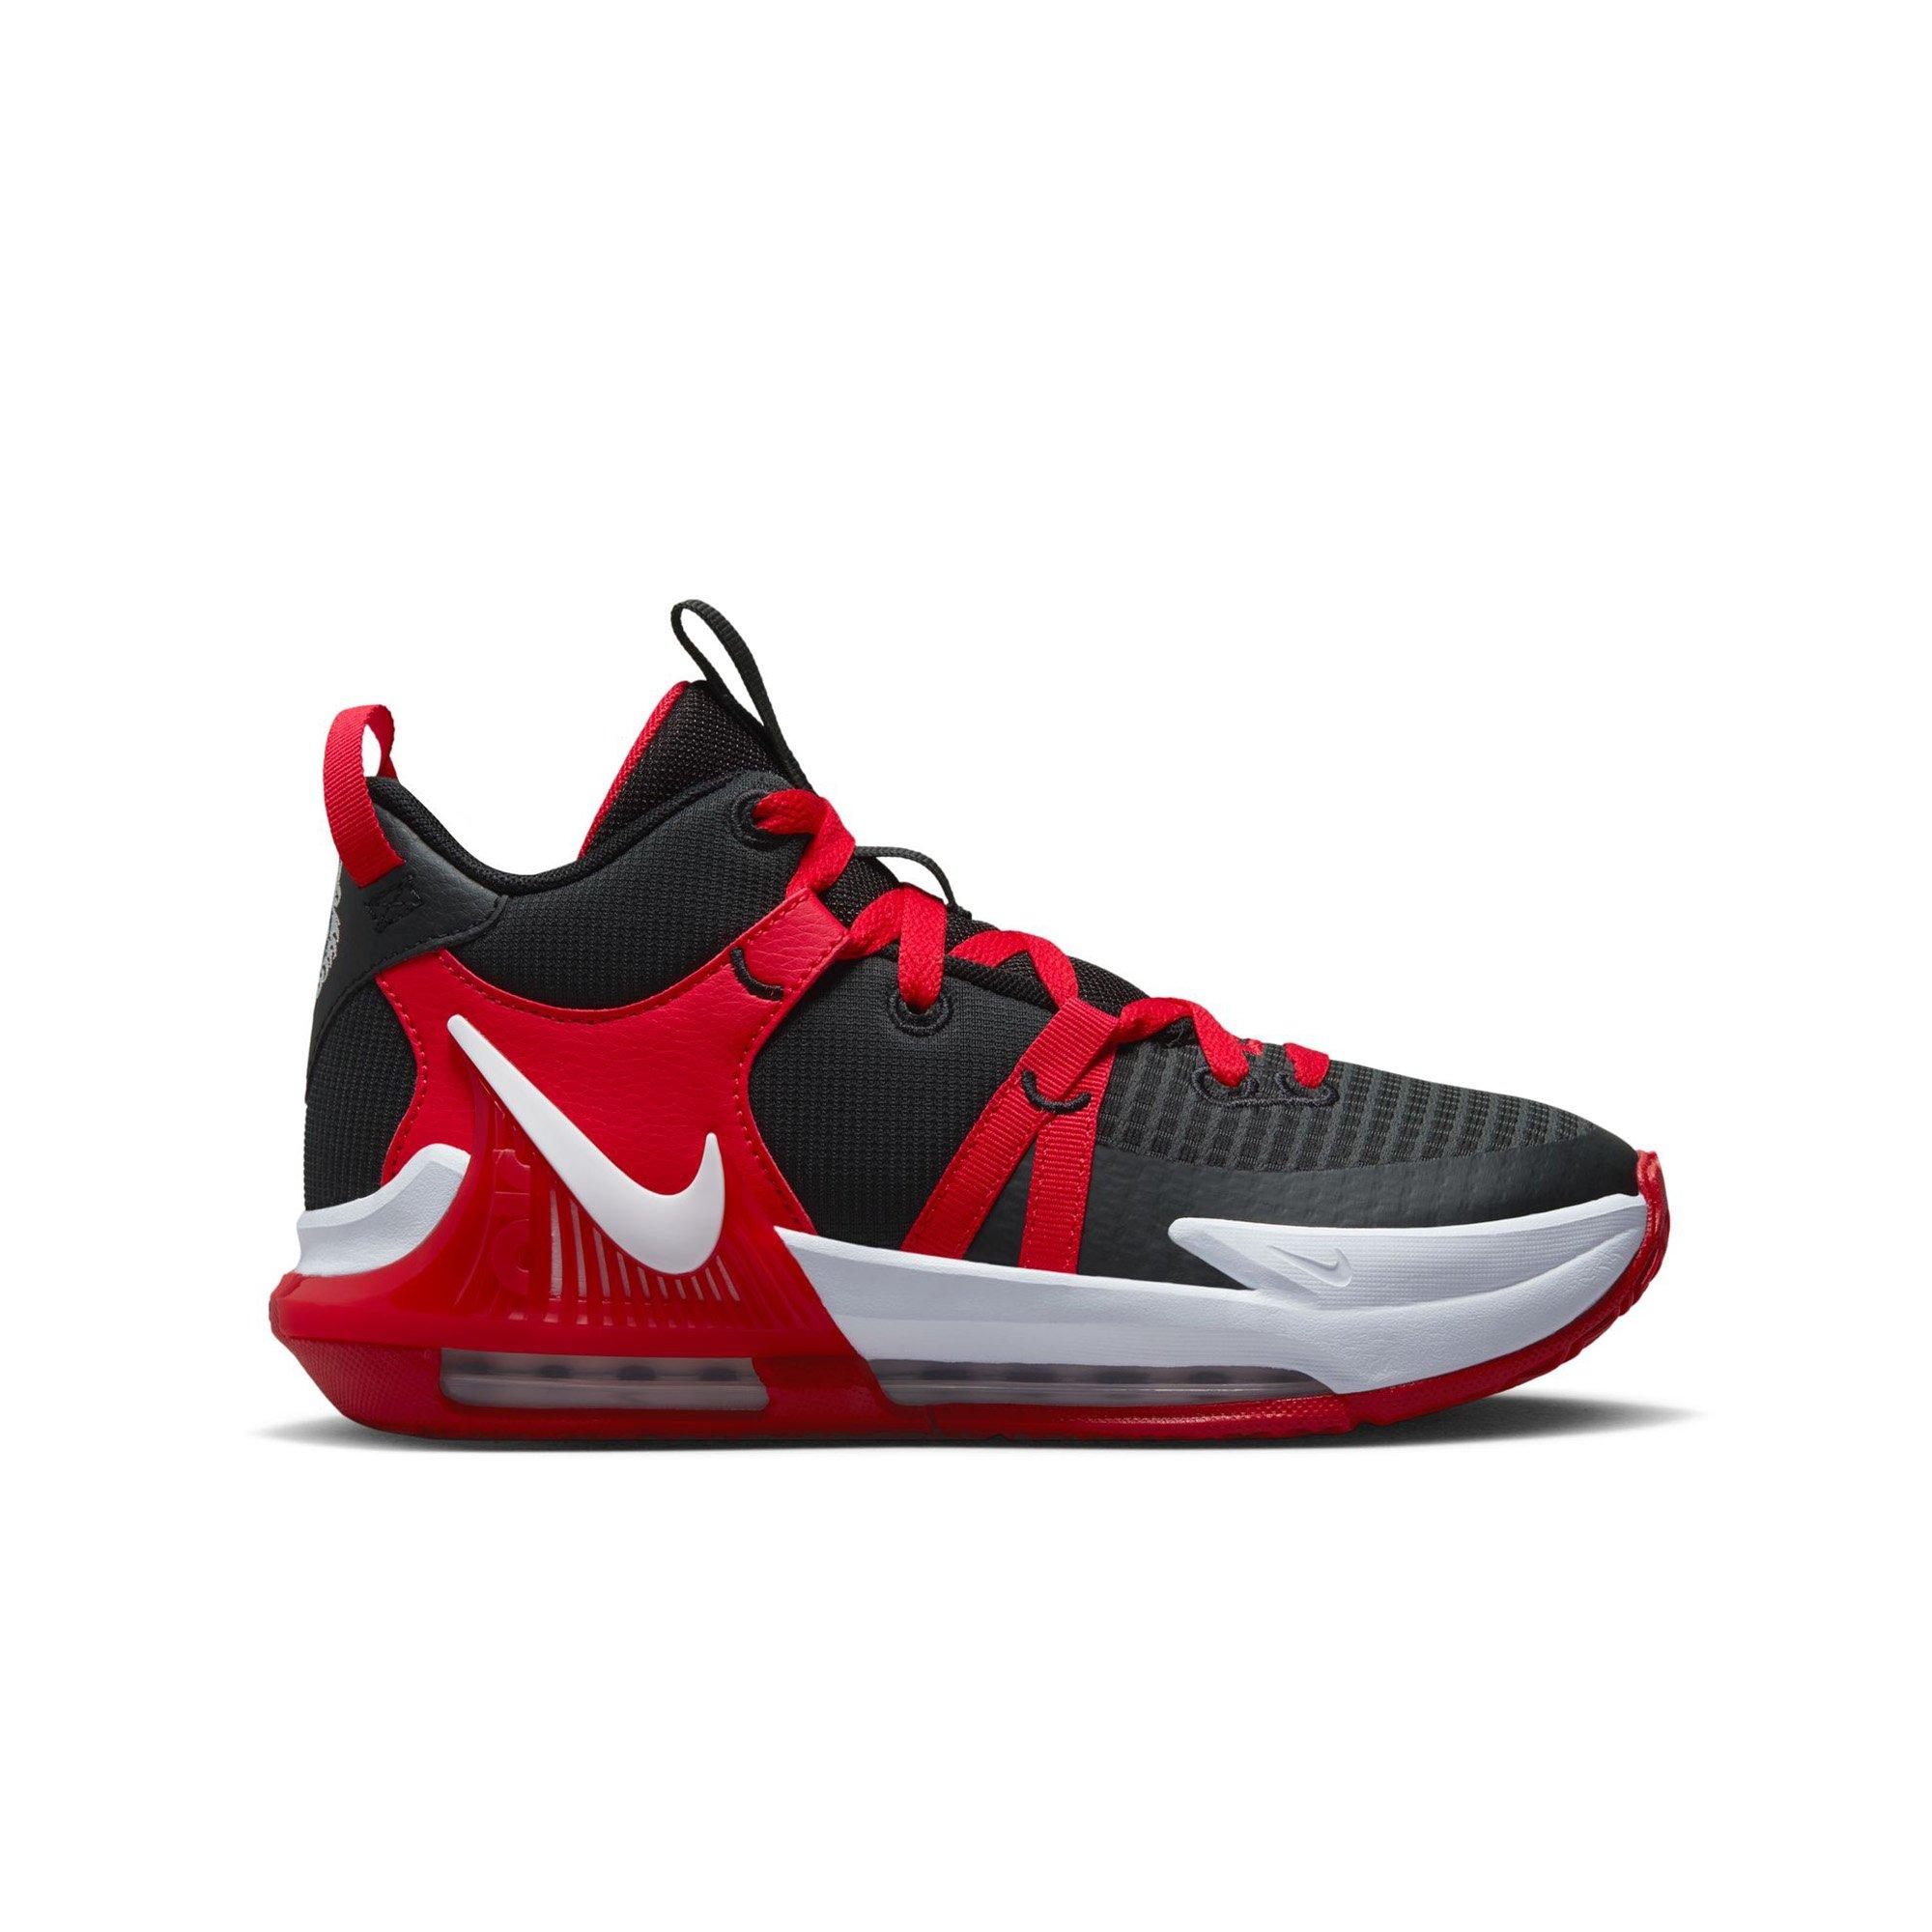 lebron james nike shoes red and black